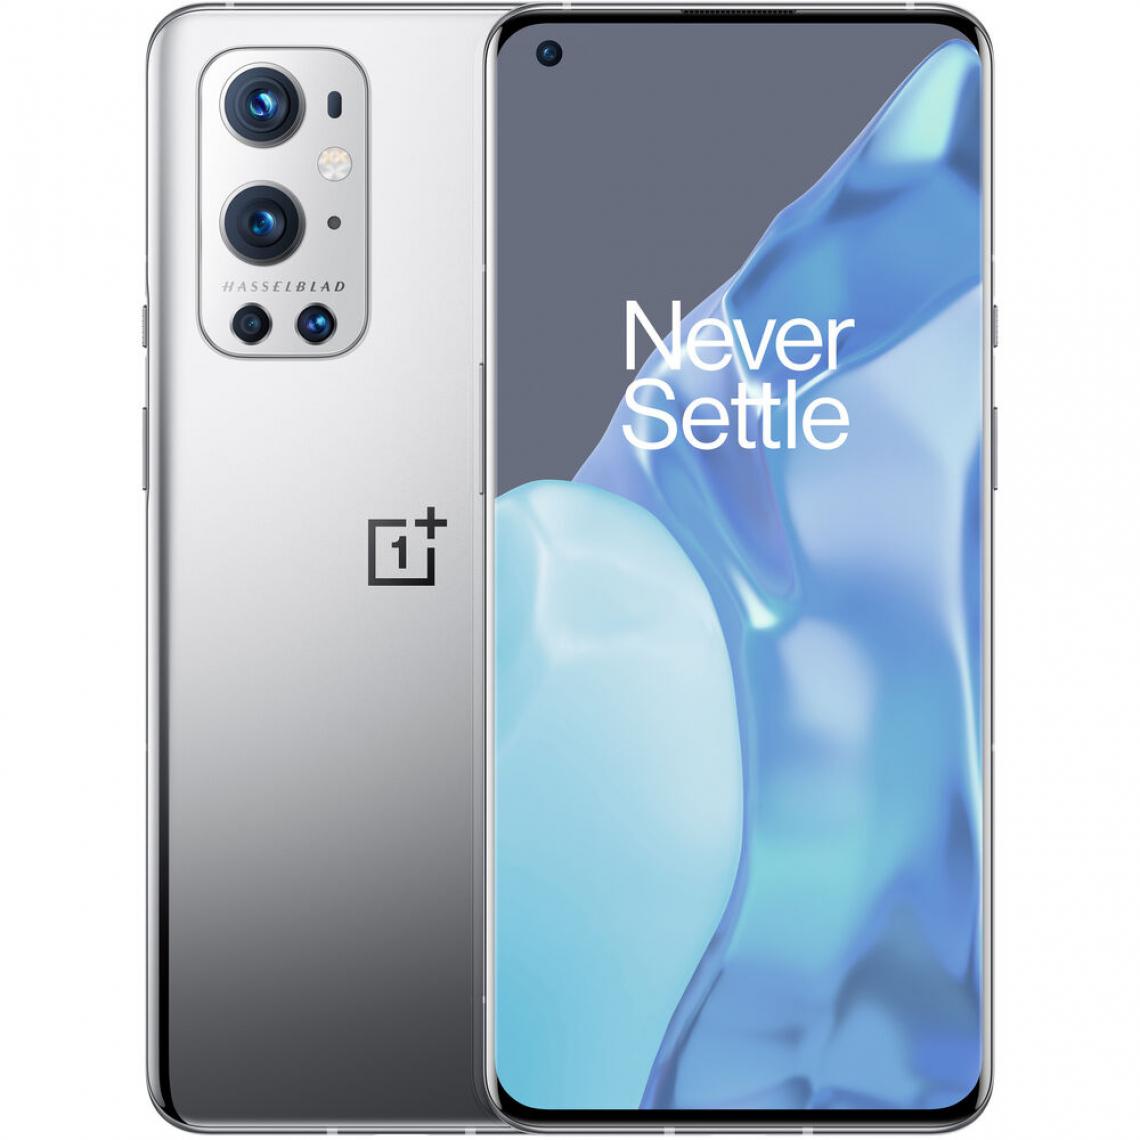 Oneplus - ONEPLUS 9 Pro 256GB (12GB Ram) 5G Morning Mist LE2120 - Smartphone Android